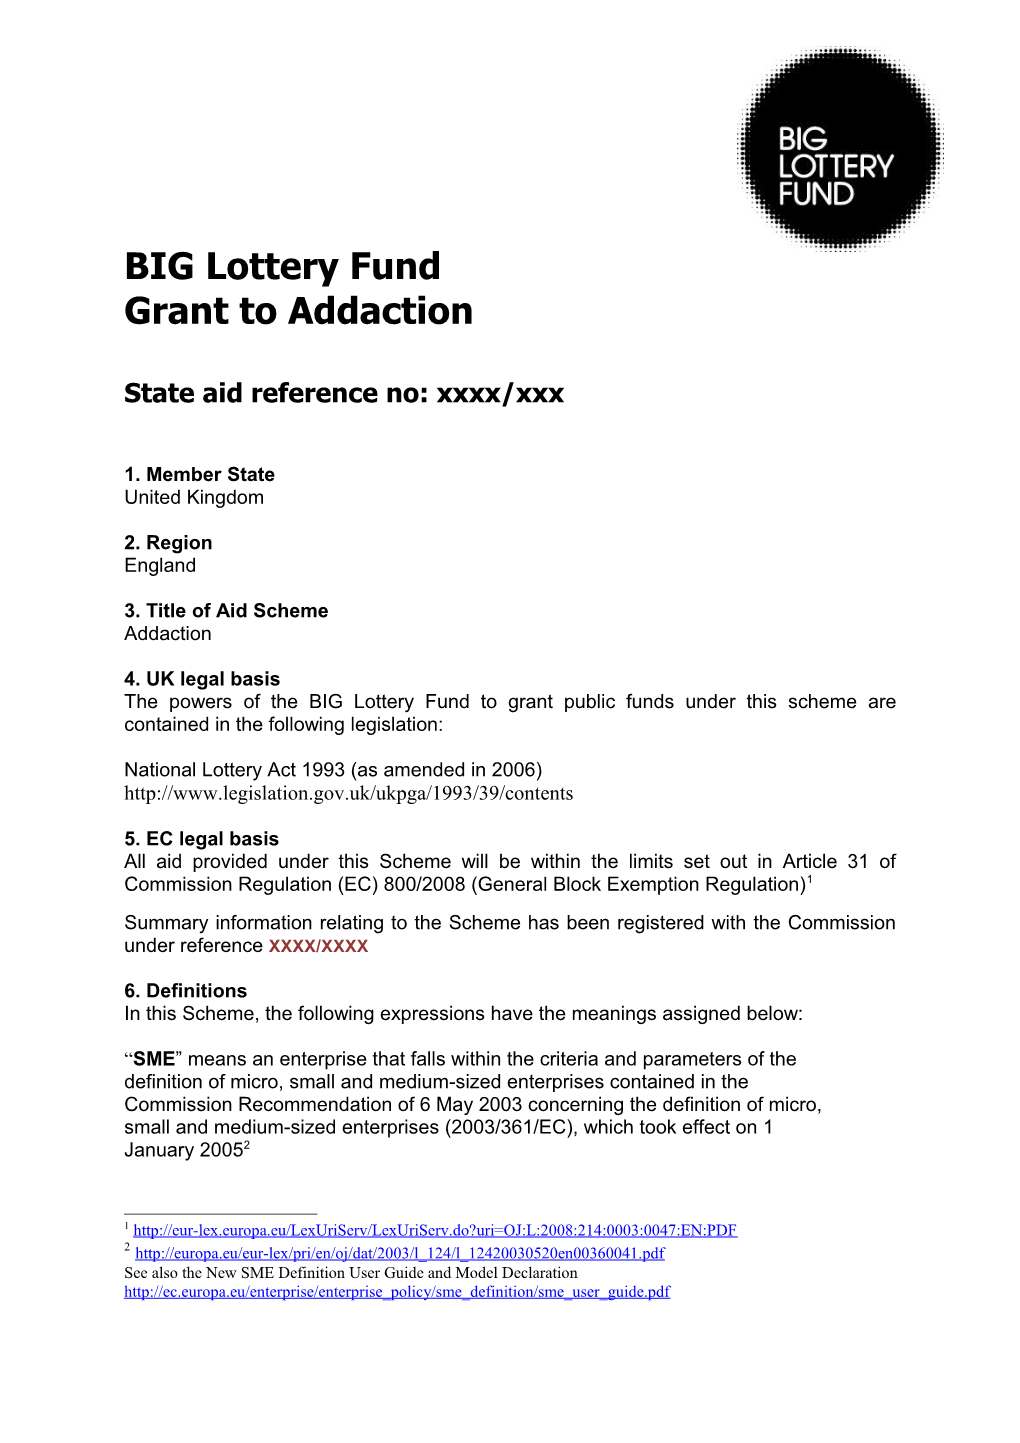 BIG Lottery Fund Grant to Addaction